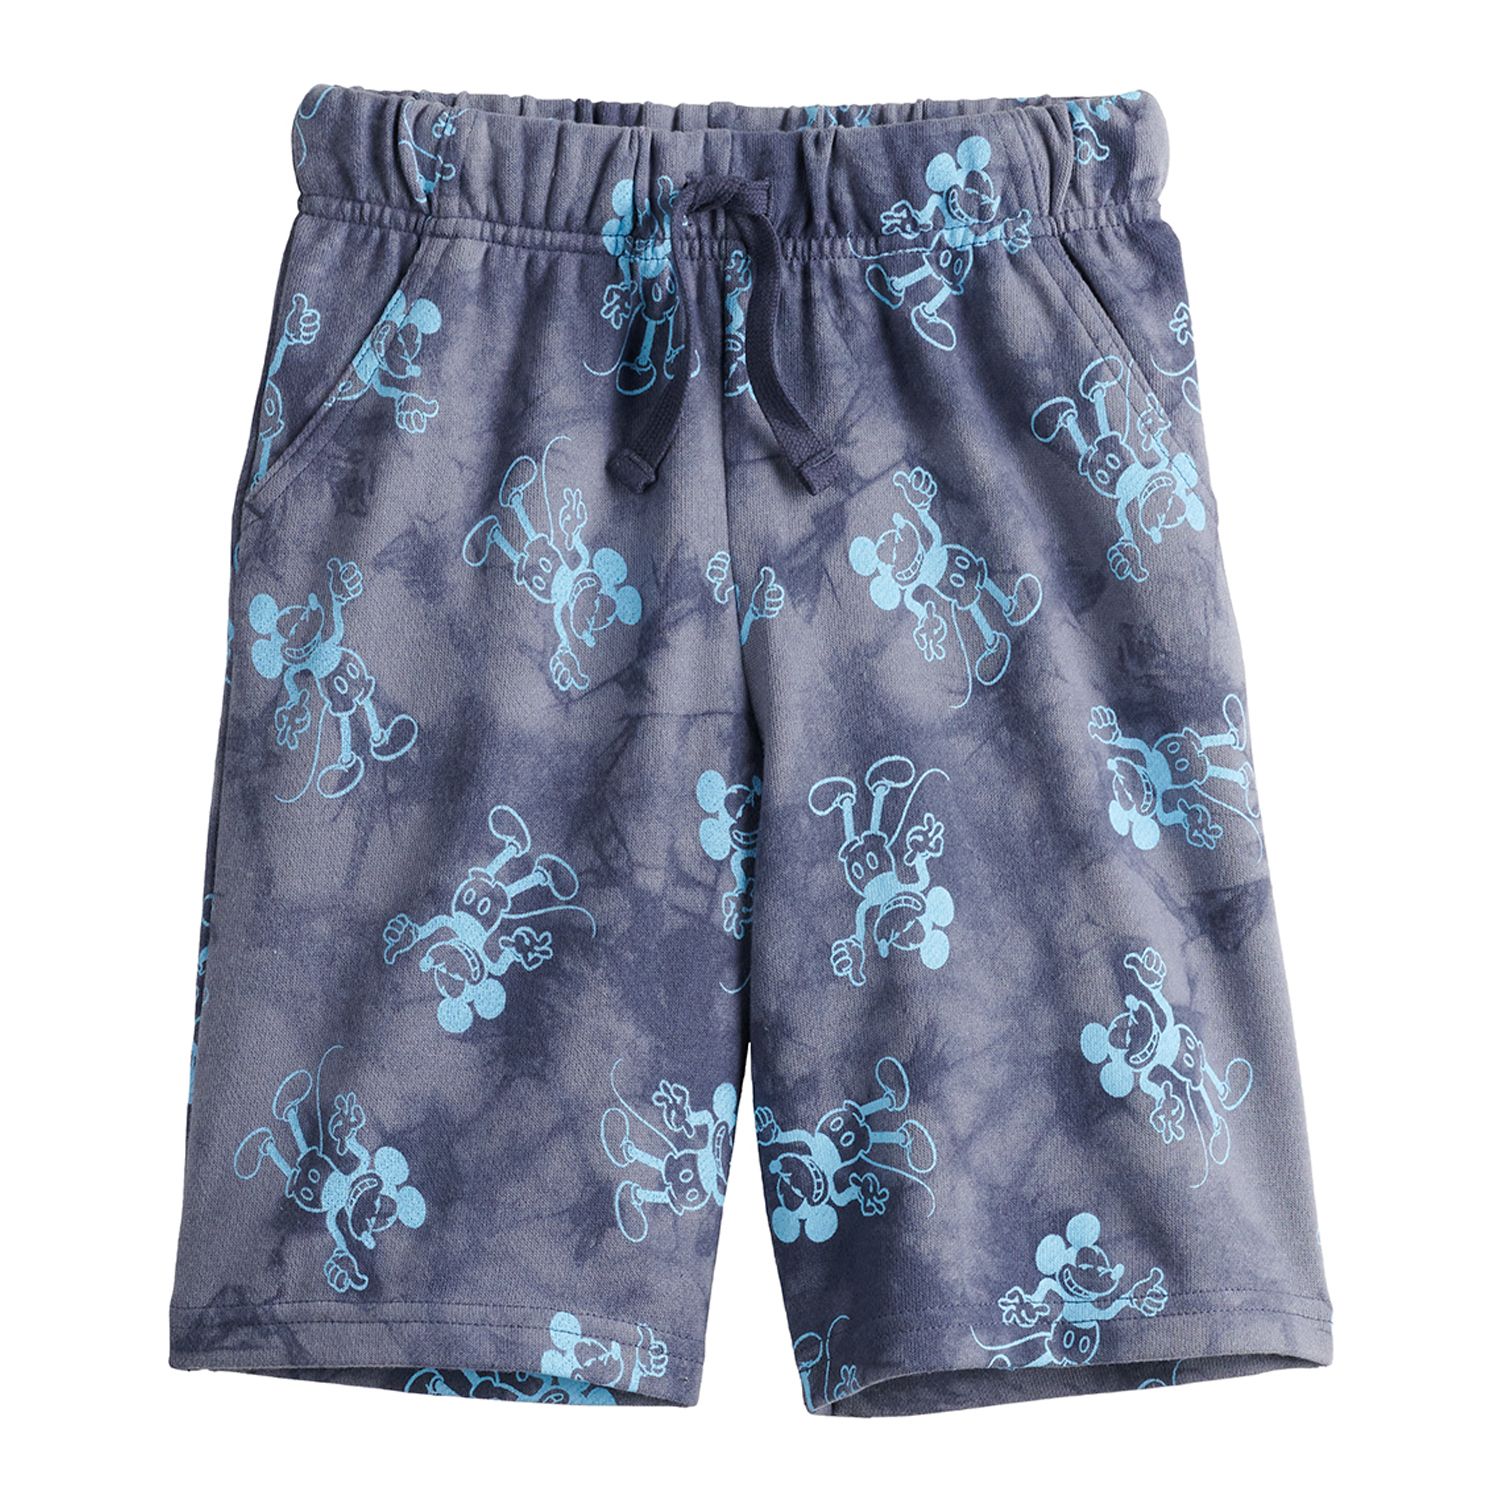 Image for Disney/Jumping Beans Disney's Mickey Mouse Boys 4-12 Fleece Shorts by Jumping Beans® at Kohl's.